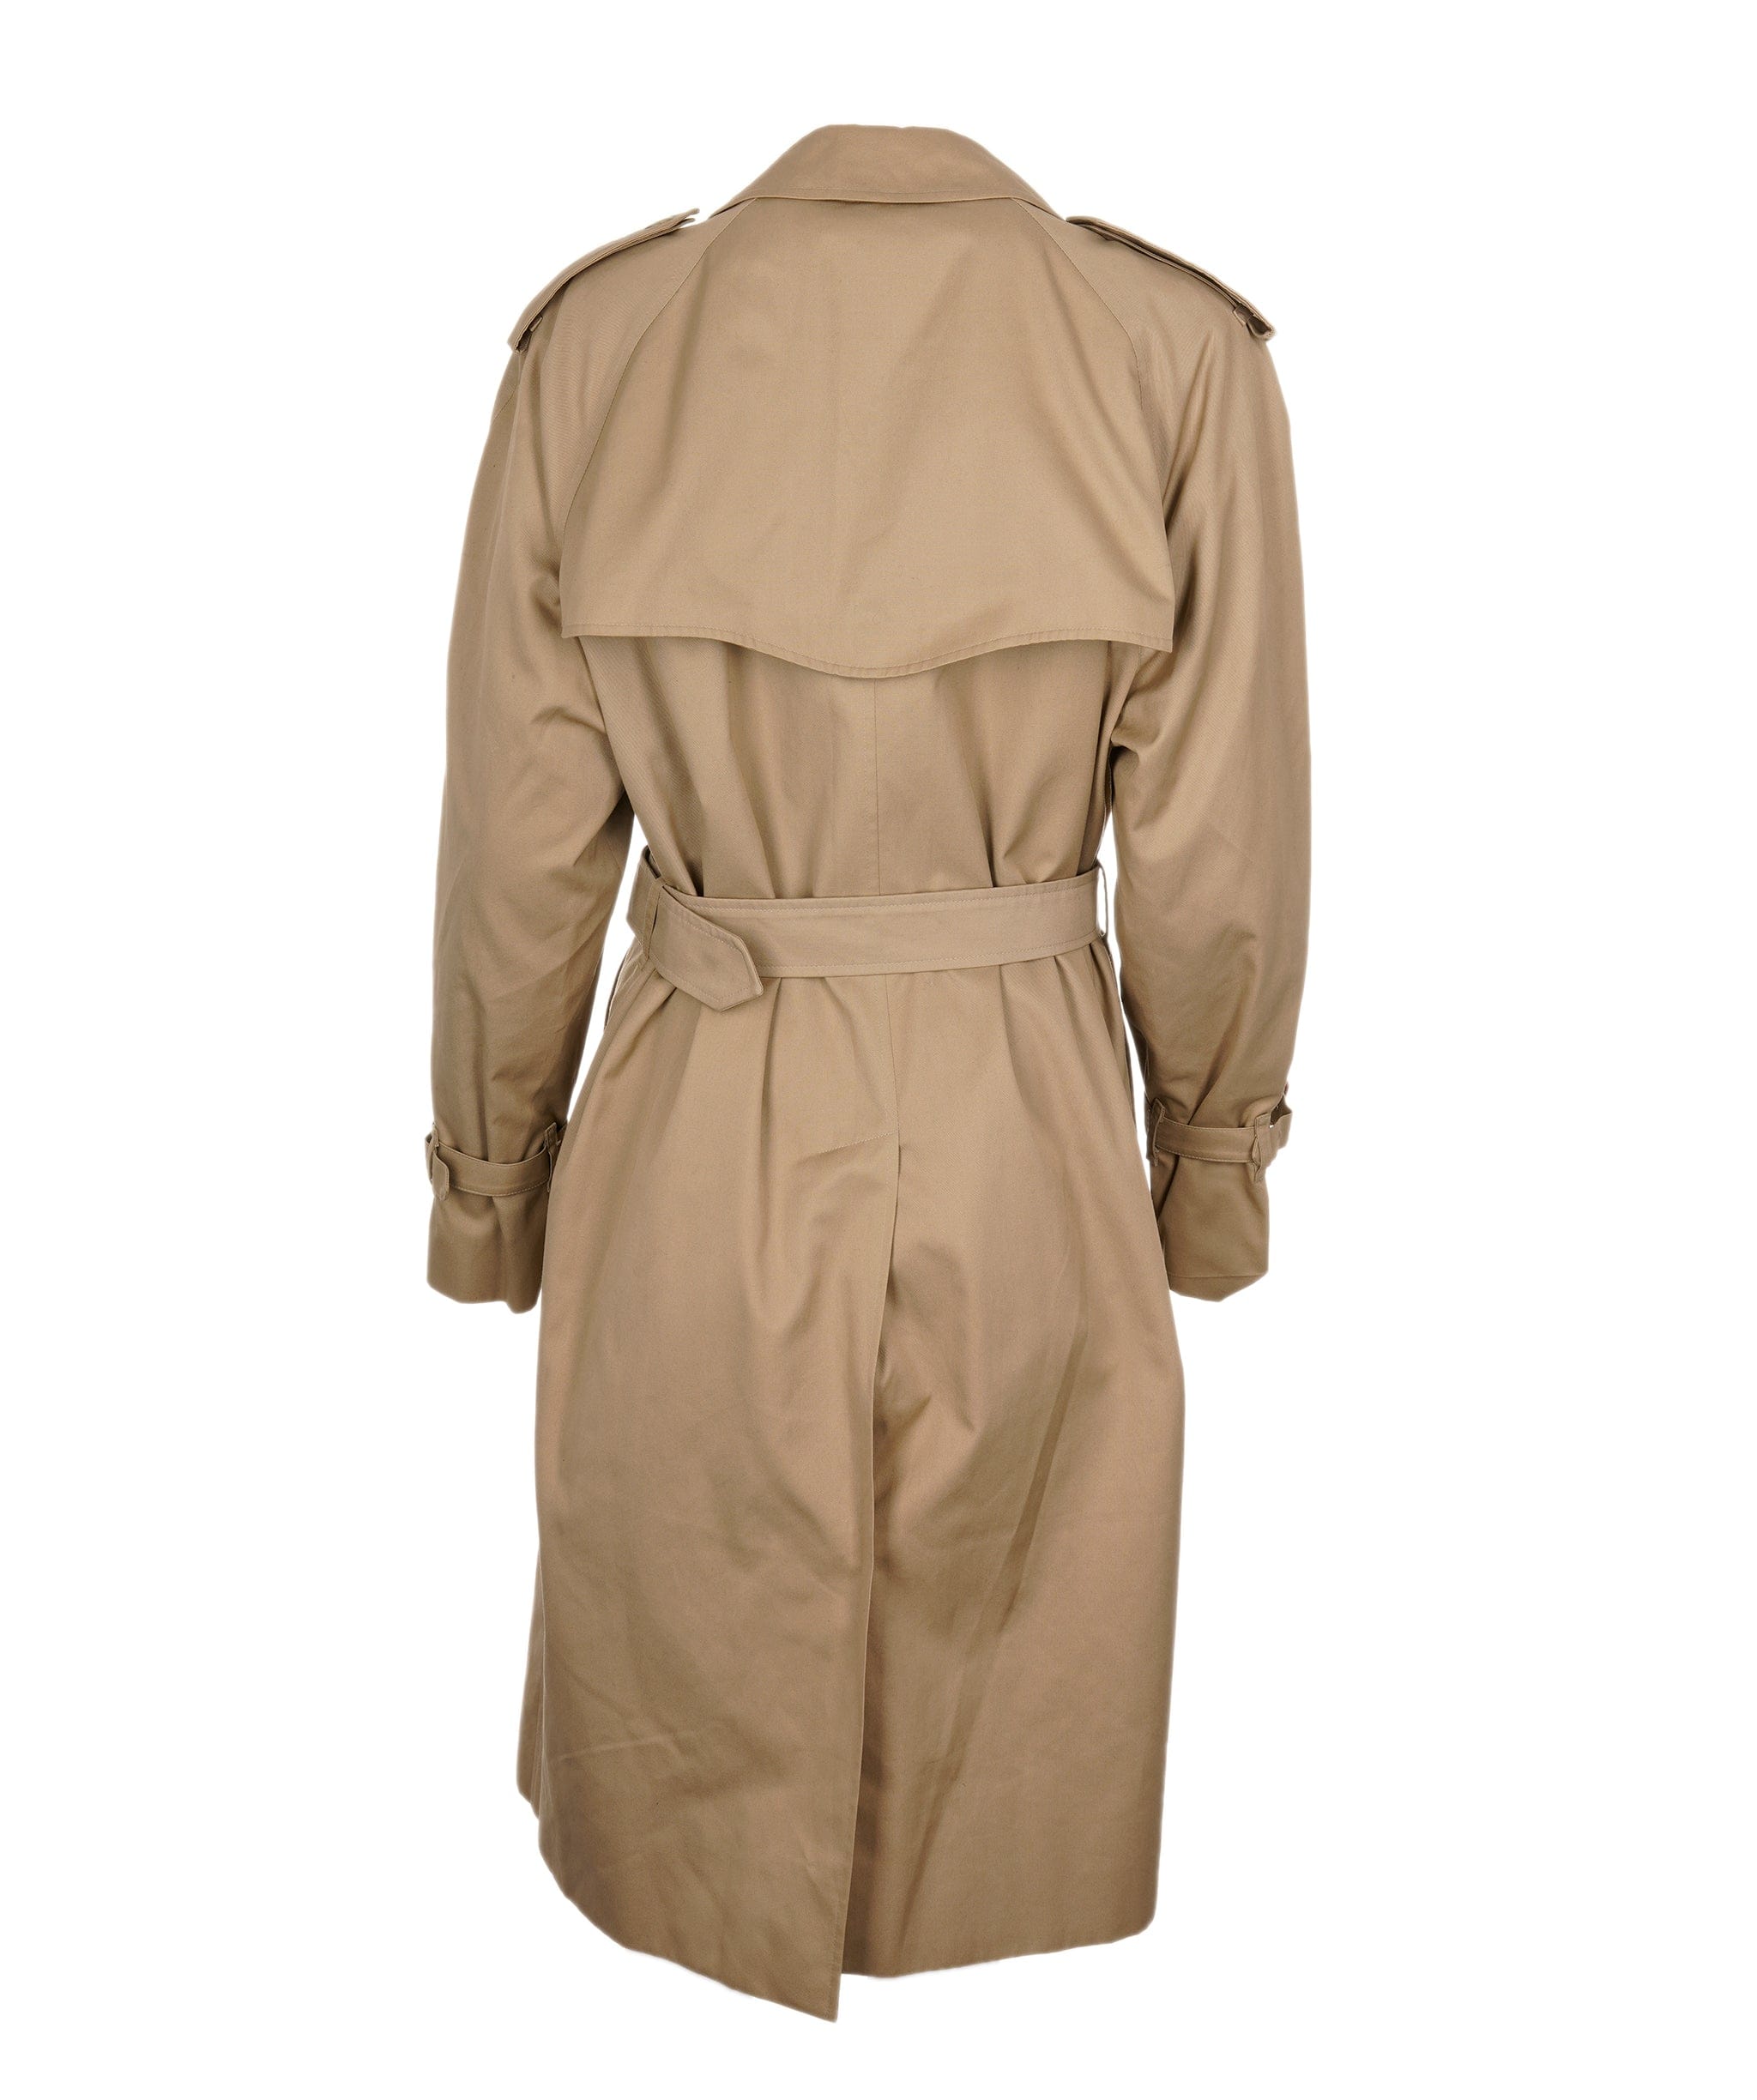 Burberry Burberry Trench size 42 - AWC2088